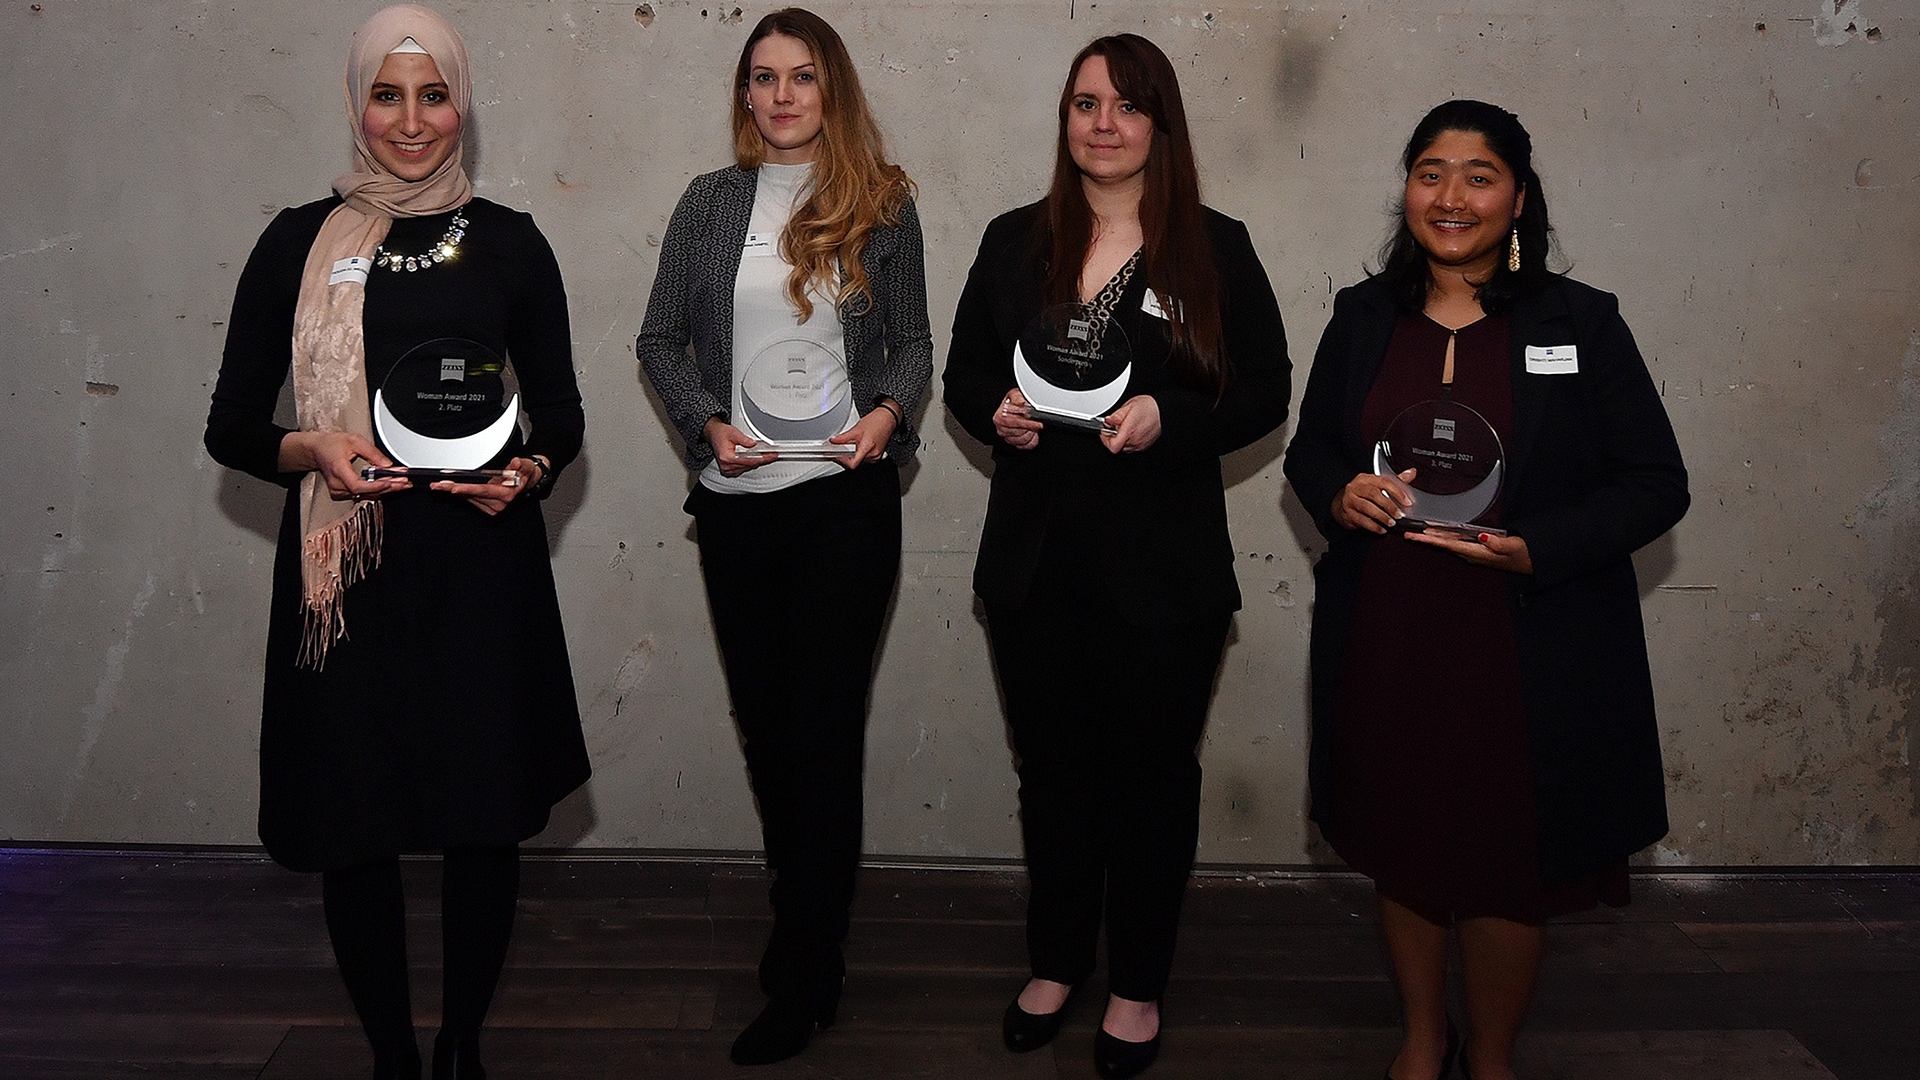 Corina Hampel won first place, second Houda El-Messari, and third place went to Drishti Maharjan. A special prize was also awarded to Sarah-Lee Mendenhall (f.l.t.r.: Houda El-Messari, Corina Hampel, Sarah-Lee Mendenhall, Drishti Maharjan© ZEISS)